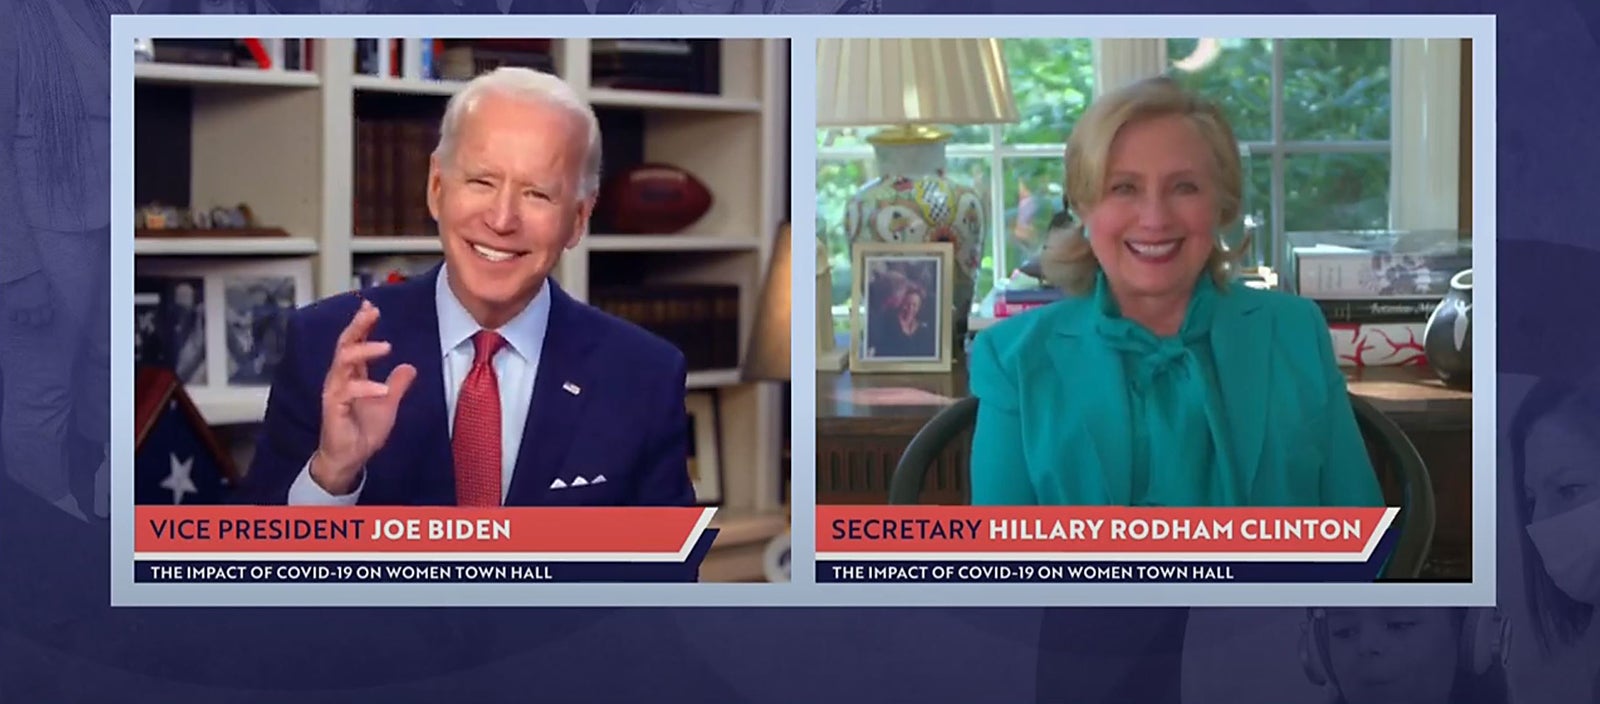 Trump’s supporters see in Biden a kind of stand-in for Hillary Clinton and say the pandemic won’t obscure the former vice president’s flaws